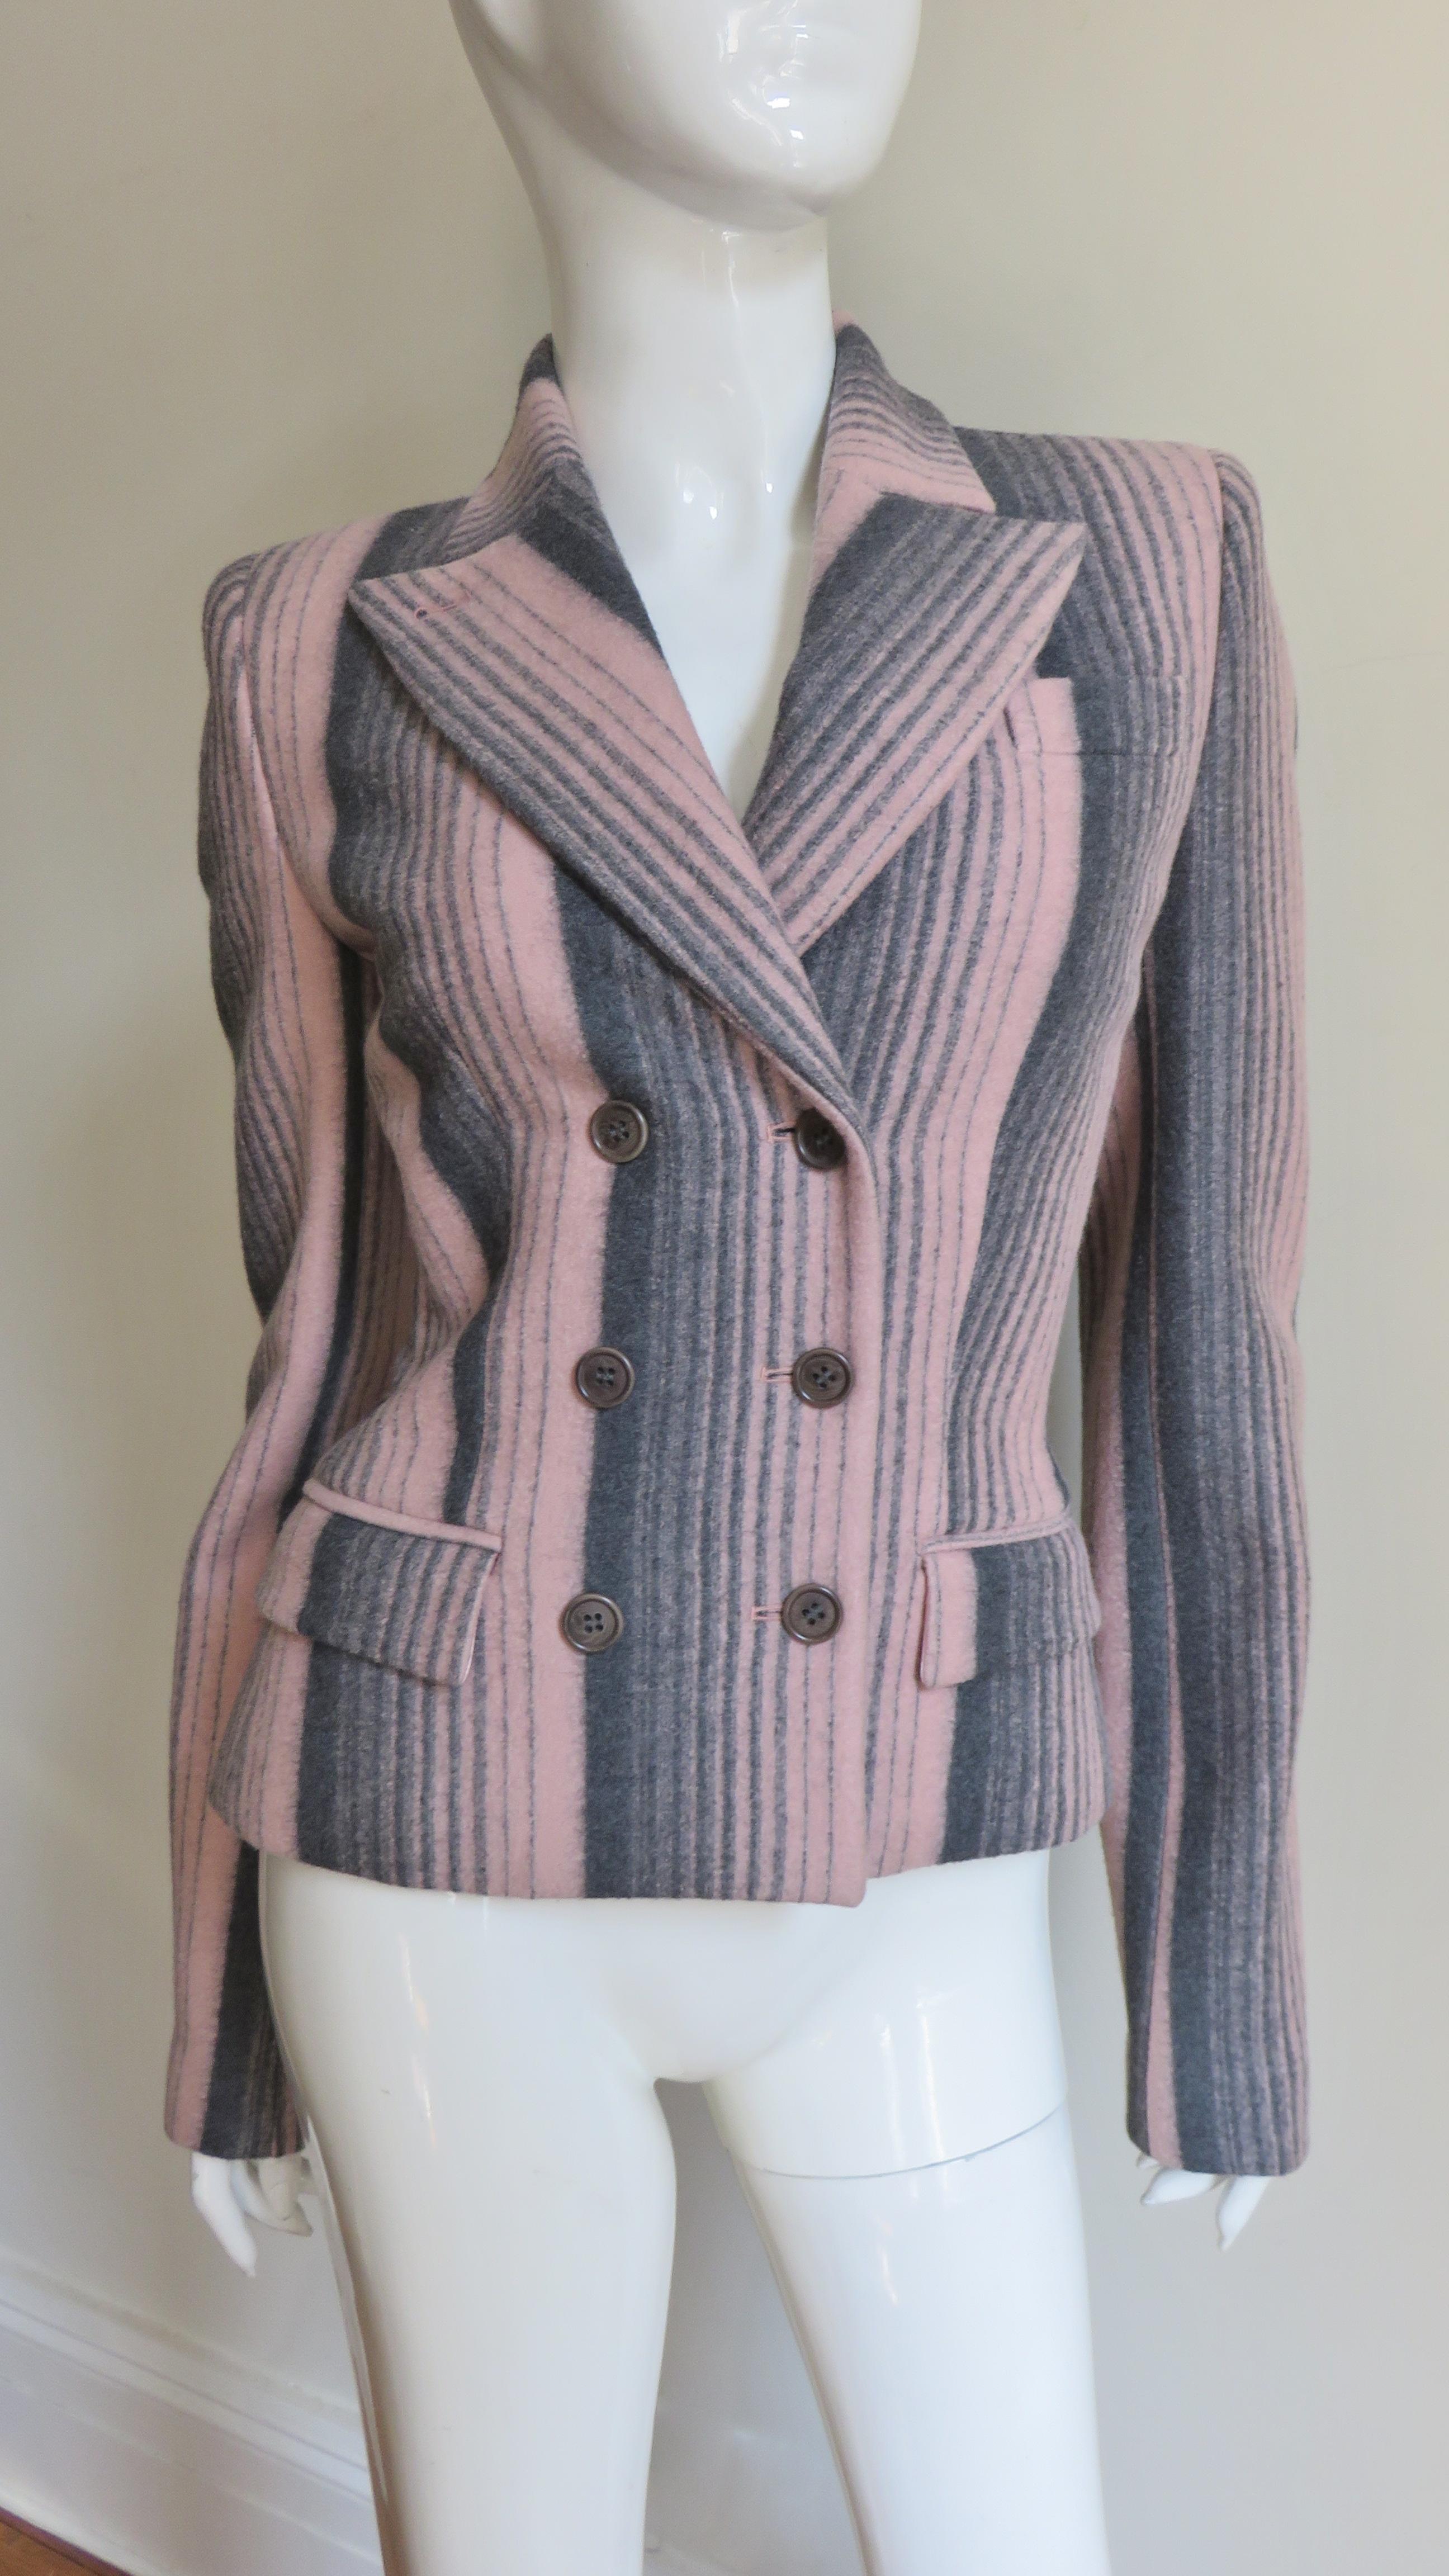 A grey and pink gradated striped wool jacket by Alexander McQueen.  It is double breasted with grey buttons at front and 3 at each cuff.  There is light shoulder padding, flap pockets at each front hip and a double vent in the back.  It is lined in